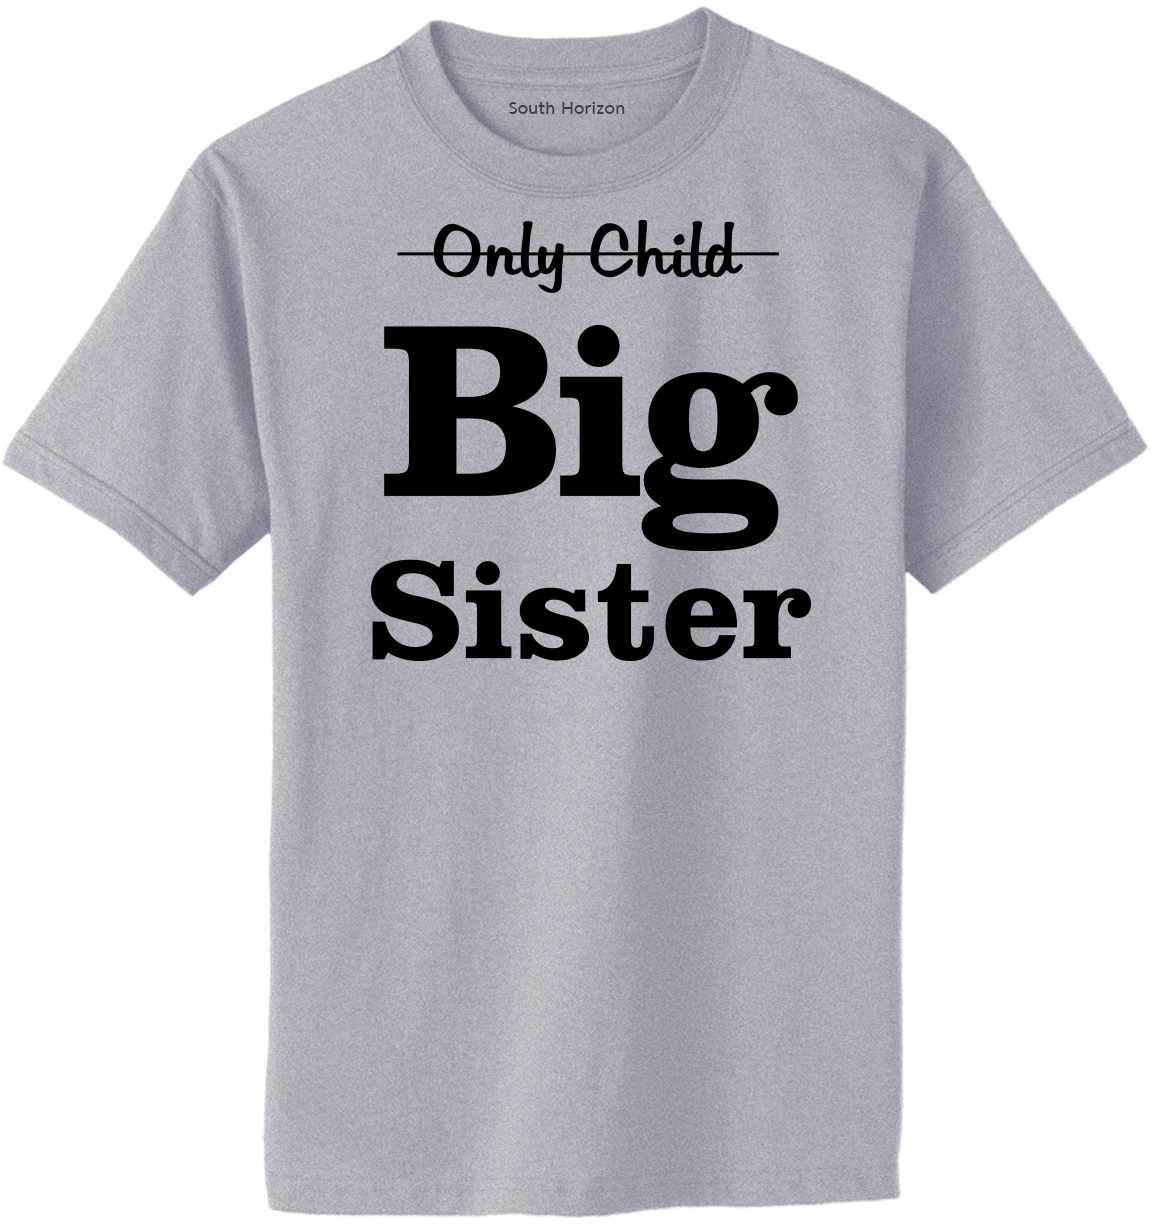 Only Child BIG SISTER on Adult T-Shirt (#967-1)